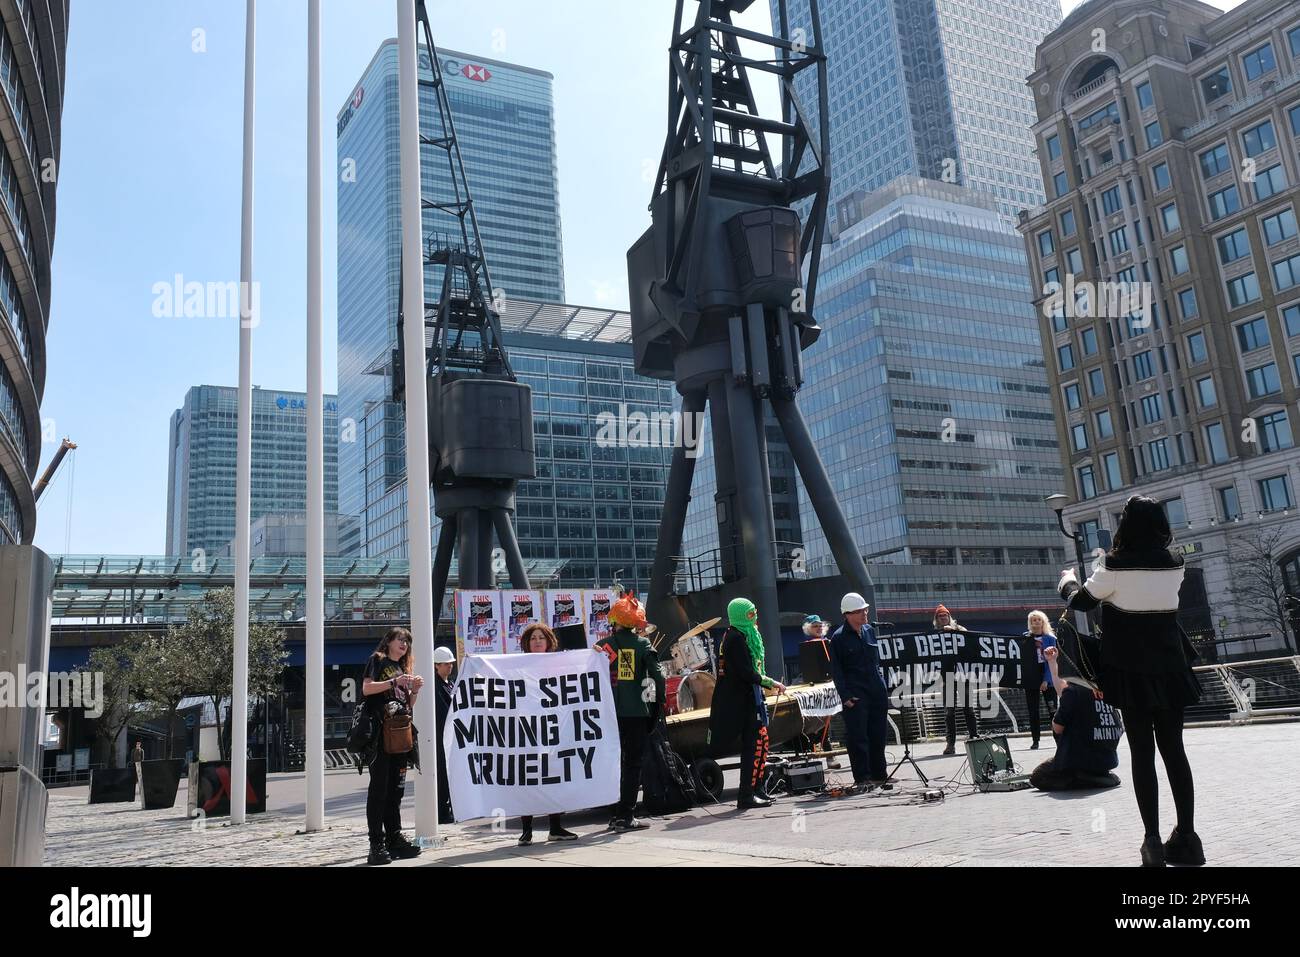 London, UK. 3rd May, 2023. Environmental activist group Ocean Rebelllion staged a heavy metal performance protest with Dutch band 'The Polymetallic Nodules' outside the venue hosting the two-day Deep Sea Mining Summit in Canary Wharf. The group opposes deep sea mining projects with grave concerns it would cause environmental harms including the destruction of sea beds and marine habitats - as well as water pollution during the process of extracting minerals. Credit: Eleventh Hour Photography/Alamy Live News Credit: Eleventh Hour Photography/Alamy Live News Stock Photo